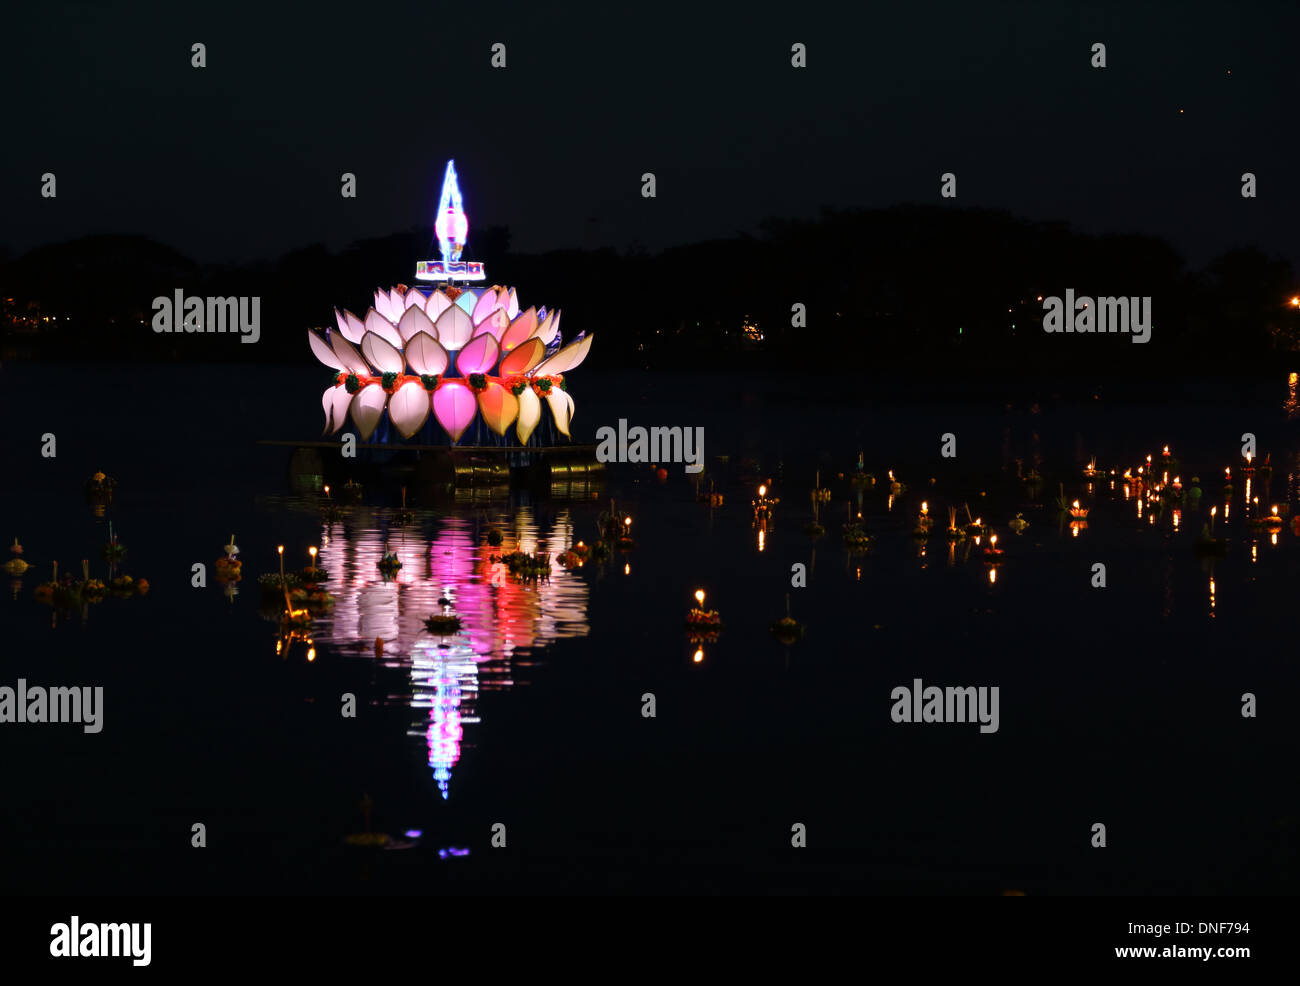 Loy kratong festival of thailand Stock Photo